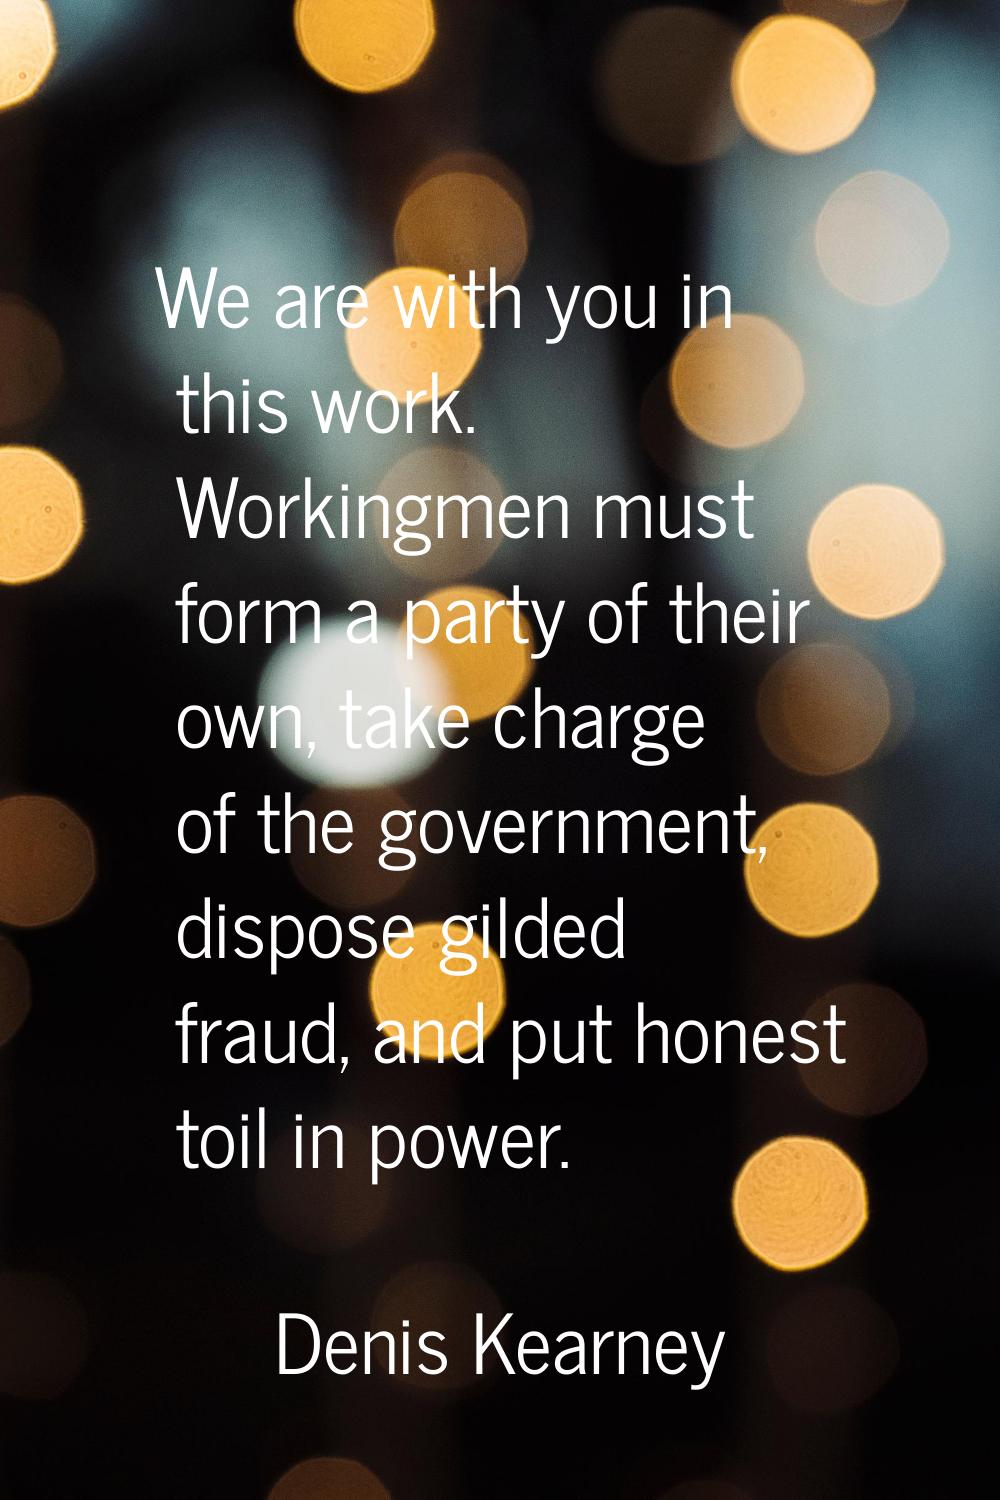 We are with you in this work. Workingmen must form a party of their own, take charge of the governm